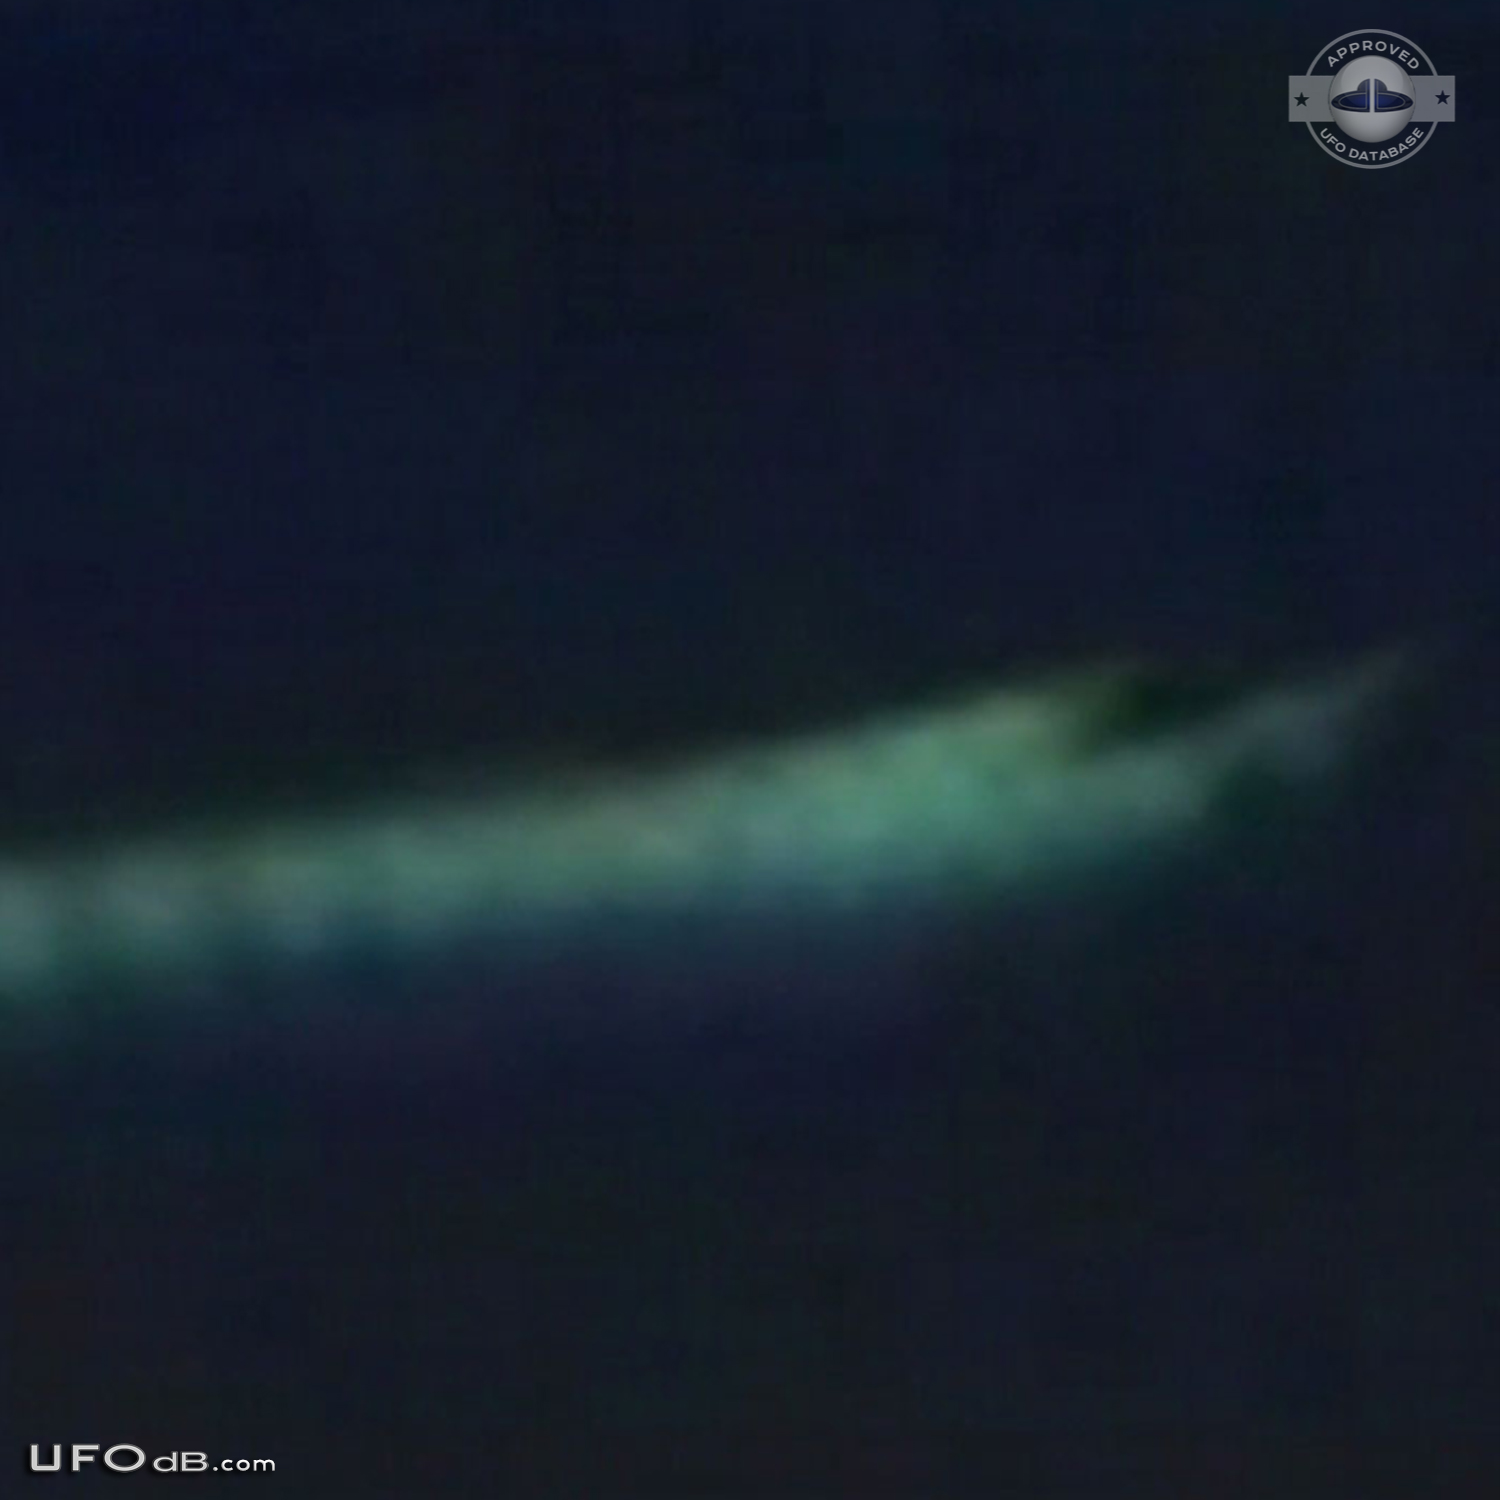 Flying Snake or Dragon UFO caught on picture in Iquique, Chile 2012  UFO Picture #421-4